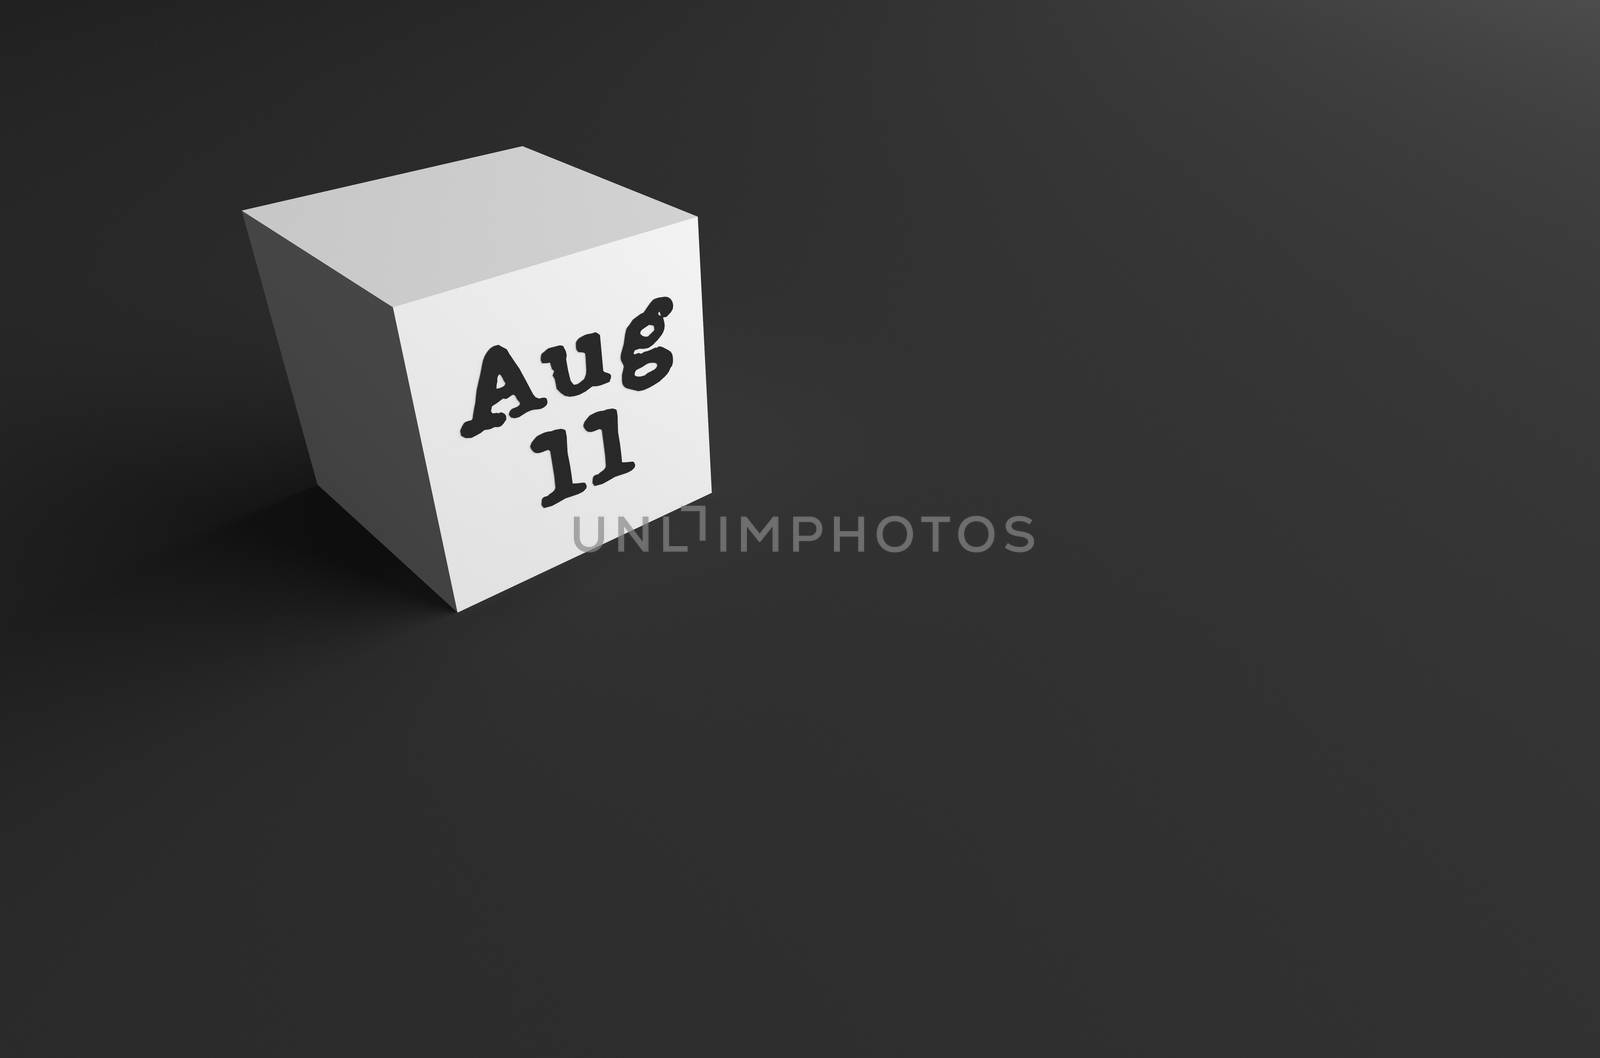 3D RENDERING OF Aug (ABBREVIATION OF AUGUST) 11 ON WHITE CUBE